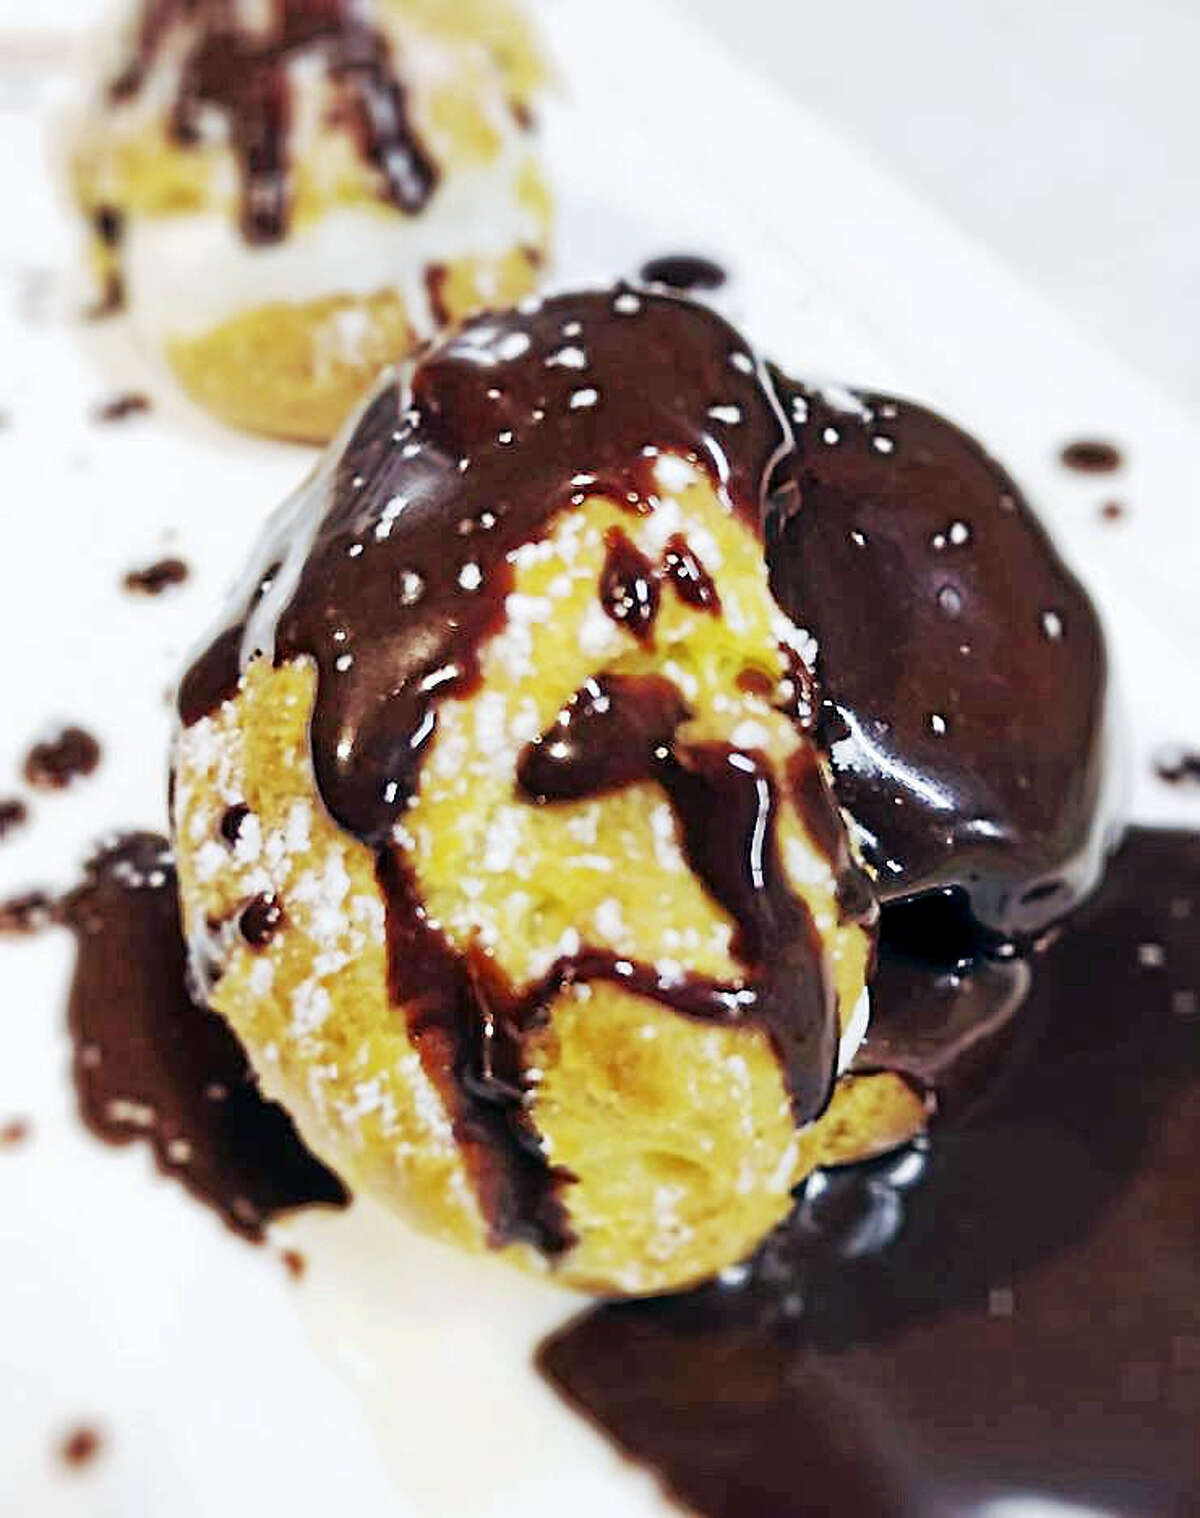 Contributed photoPetits Choux filled with house-made vanilla ice cream and warm chocolate sauce.